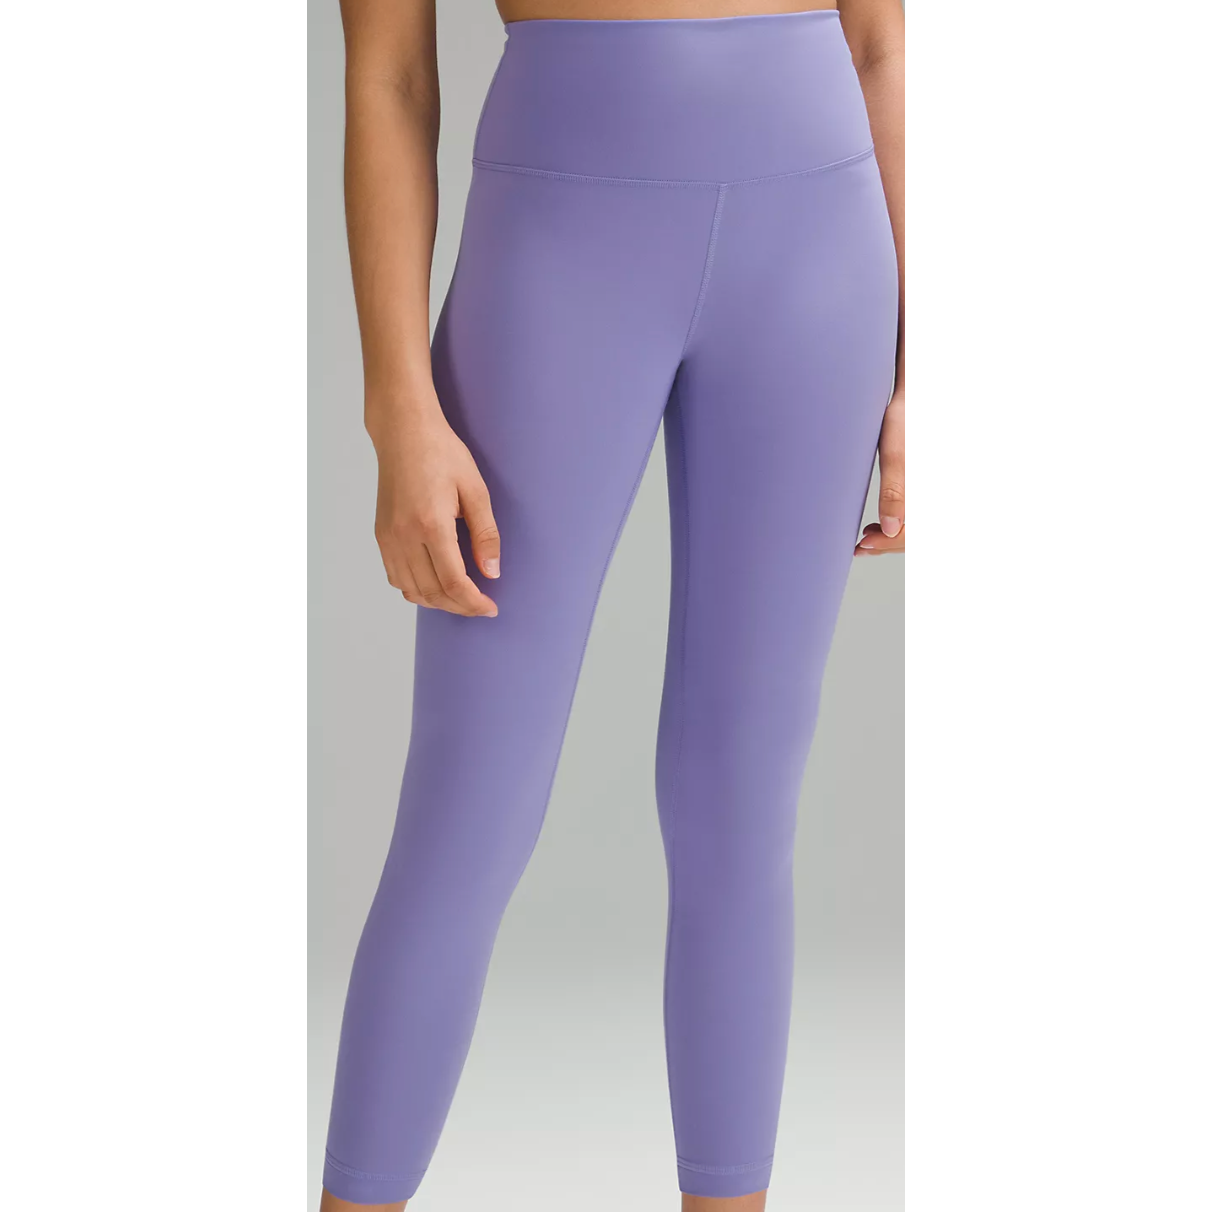 Lululemon athletica Wunder Under SmoothCover High-Rise Tight 25